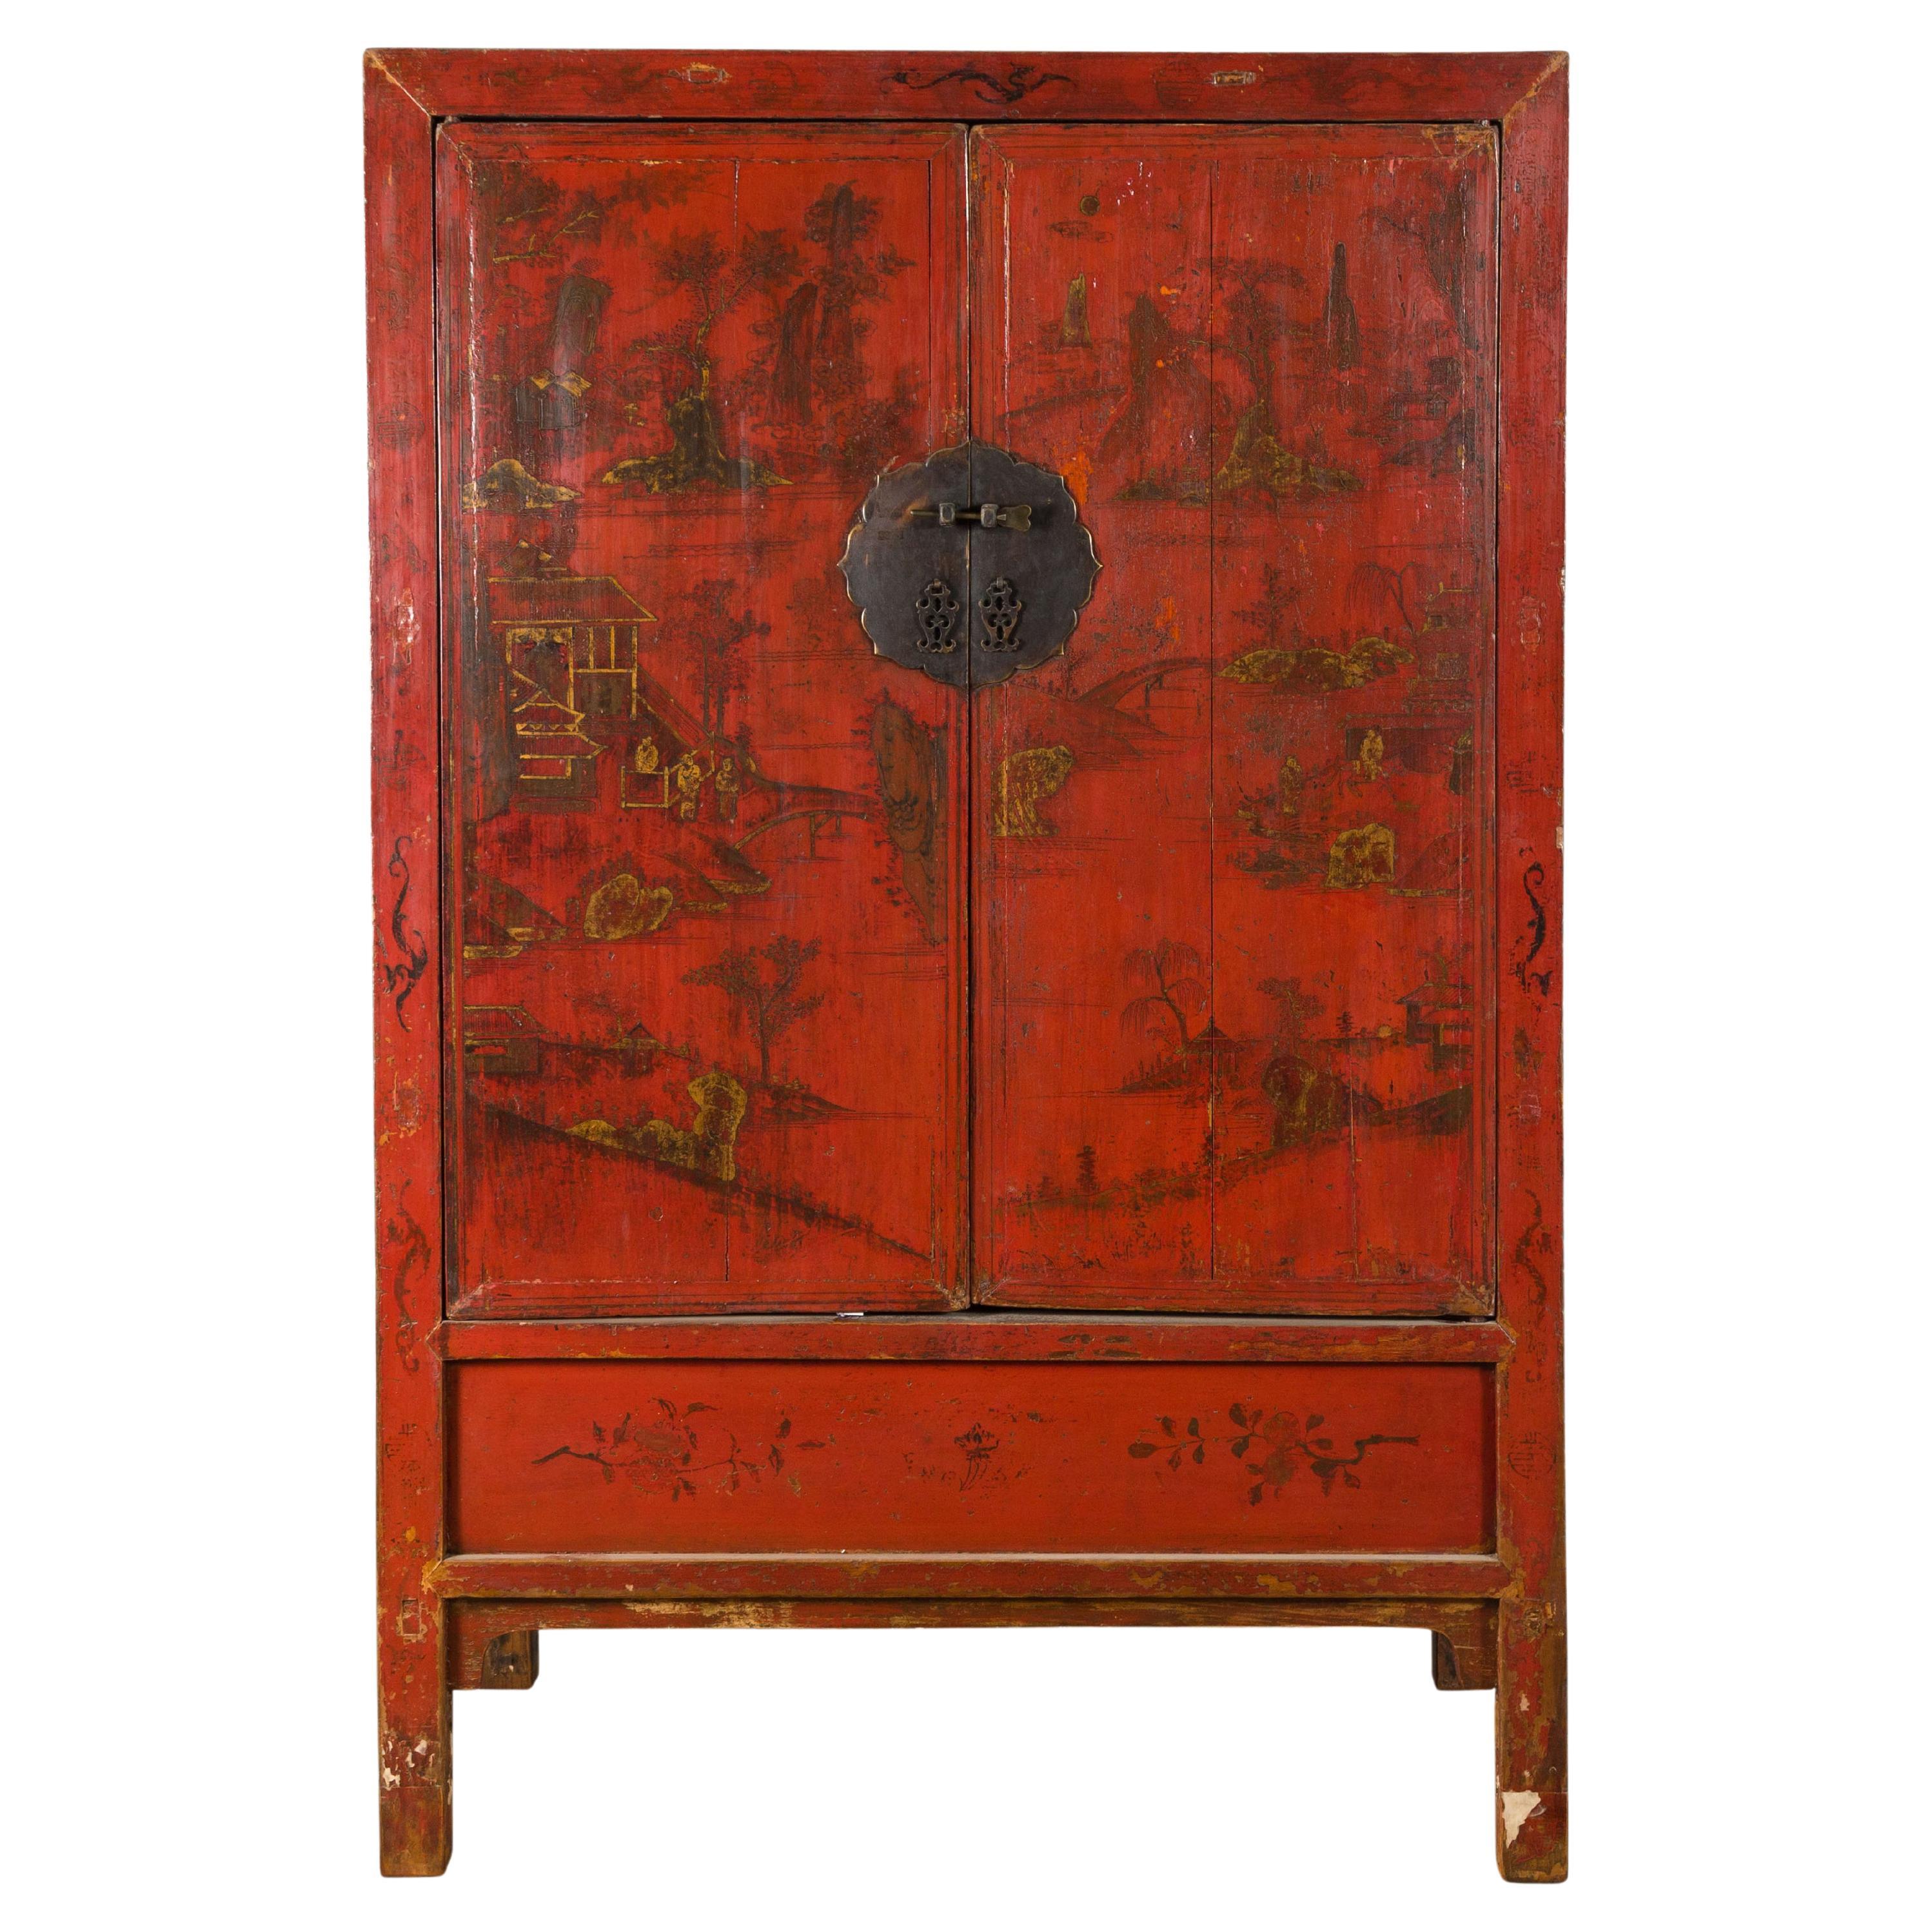 Qing Dynasty 19th Century Hand-Painted Cabinet with Original Red Lacquer